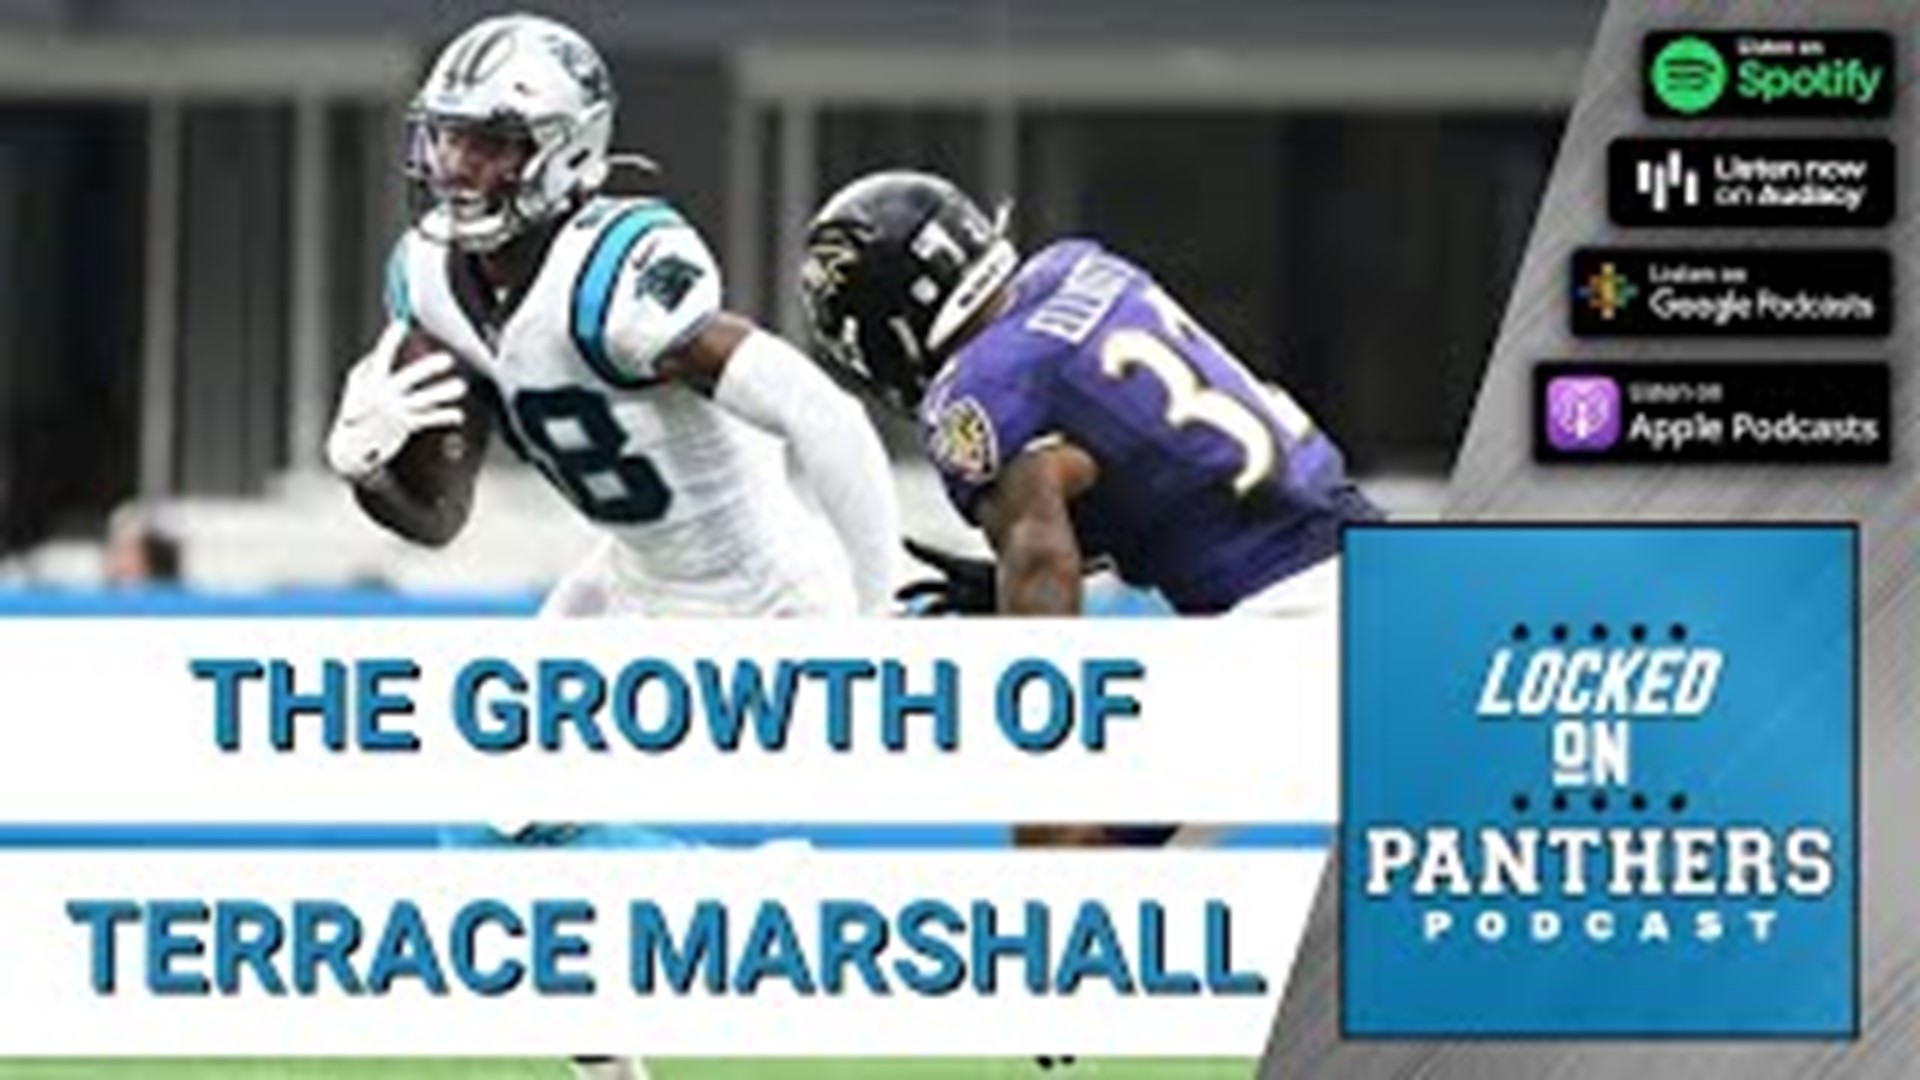 Julian Council believes there are several things Panthers fans should be looking forward to heading into the 2022 season, including the growth of Terrace Marshall.